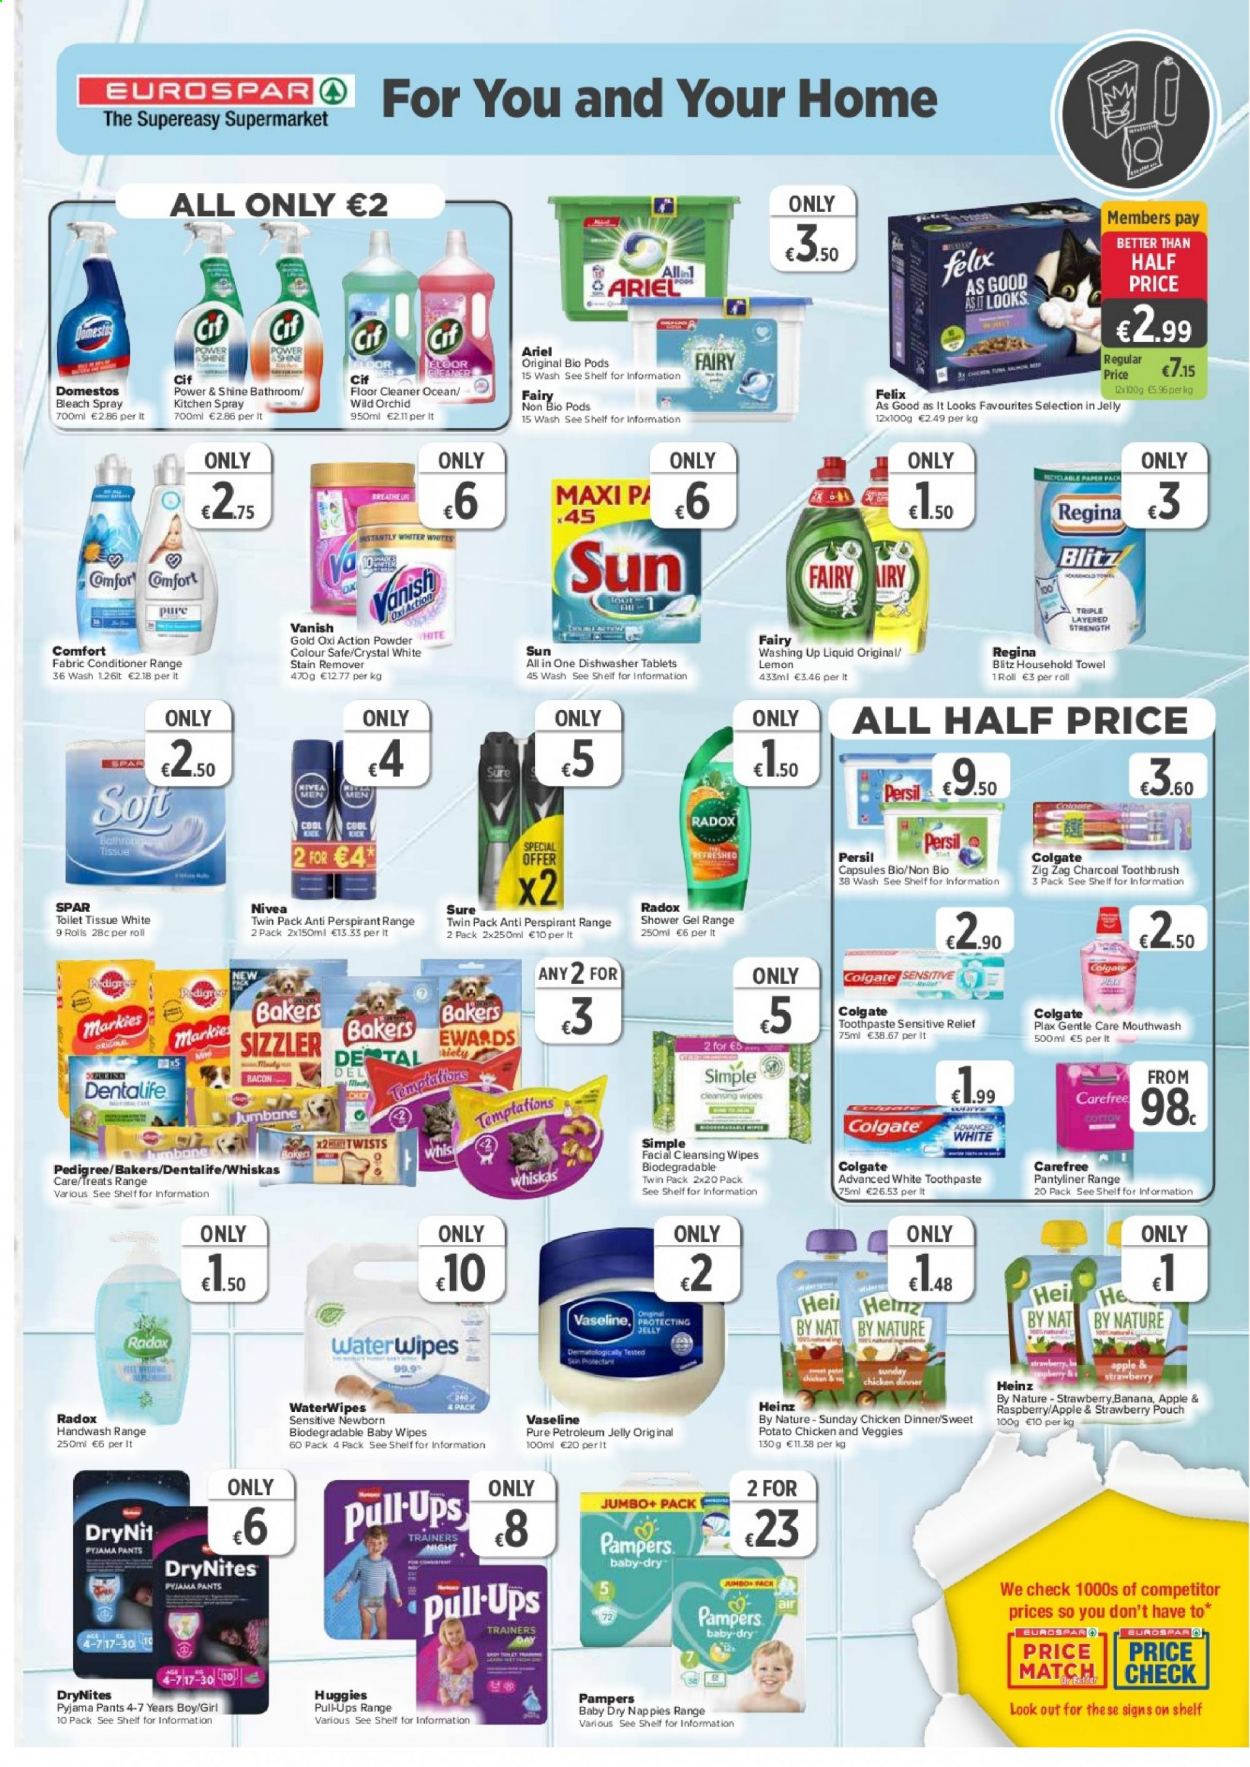 thumbnail - EUROSPAR offer  - 17.06.2021 - 07.07.2021 - Sales products - sweet potato, bacon, Heinz, cleansing wipes, wipes, Huggies, Pampers, pants, baby wipes, nappies, DryNites, Nivea, petroleum jelly, toilet paper, Domestos, cleaner, bleach, floor cleaner, stain remover, Fairy, Cif, Vanish, Persil, Ariel, Comfort softener, dishwashing liquid, shower gel, hand wash, Radox, Vaseline, Colgate, toothbrush, toothpaste, mouthwash, charcoal toothbrush, Plax, Carefree, Sure, towel, Whiskas, Pedigree, Felix, Bakers, Dentalife. Page 7.